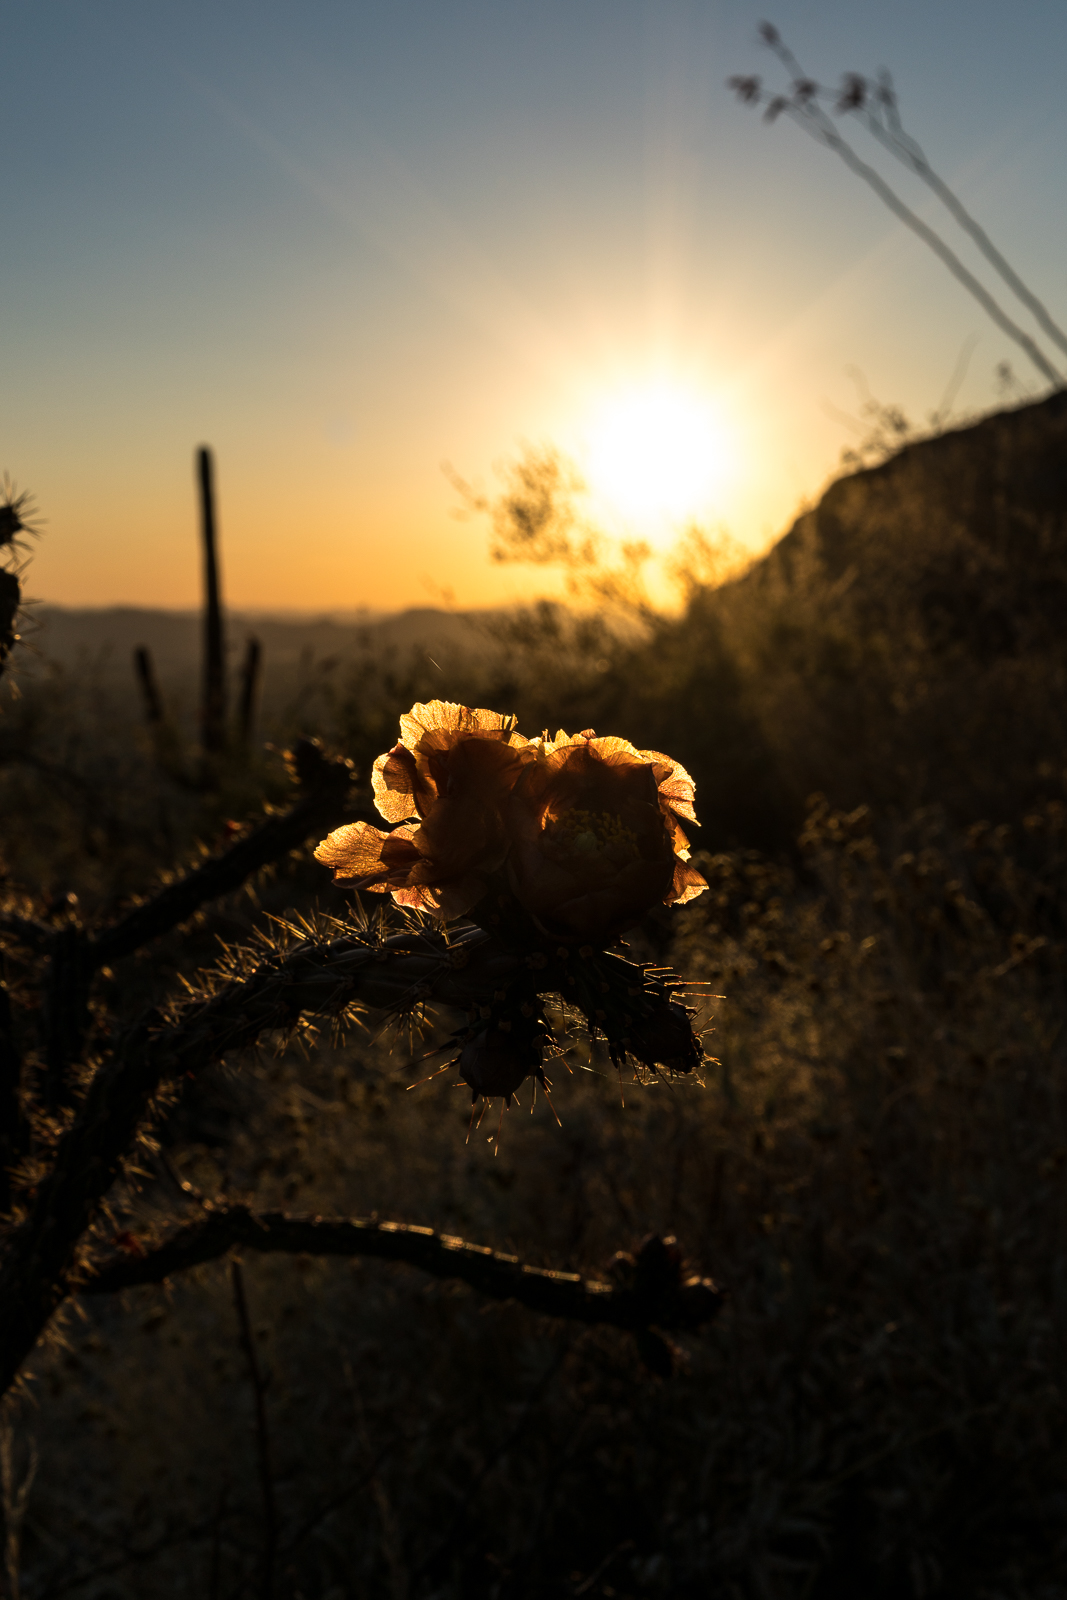 Cholla flower in the sun. April 2016.